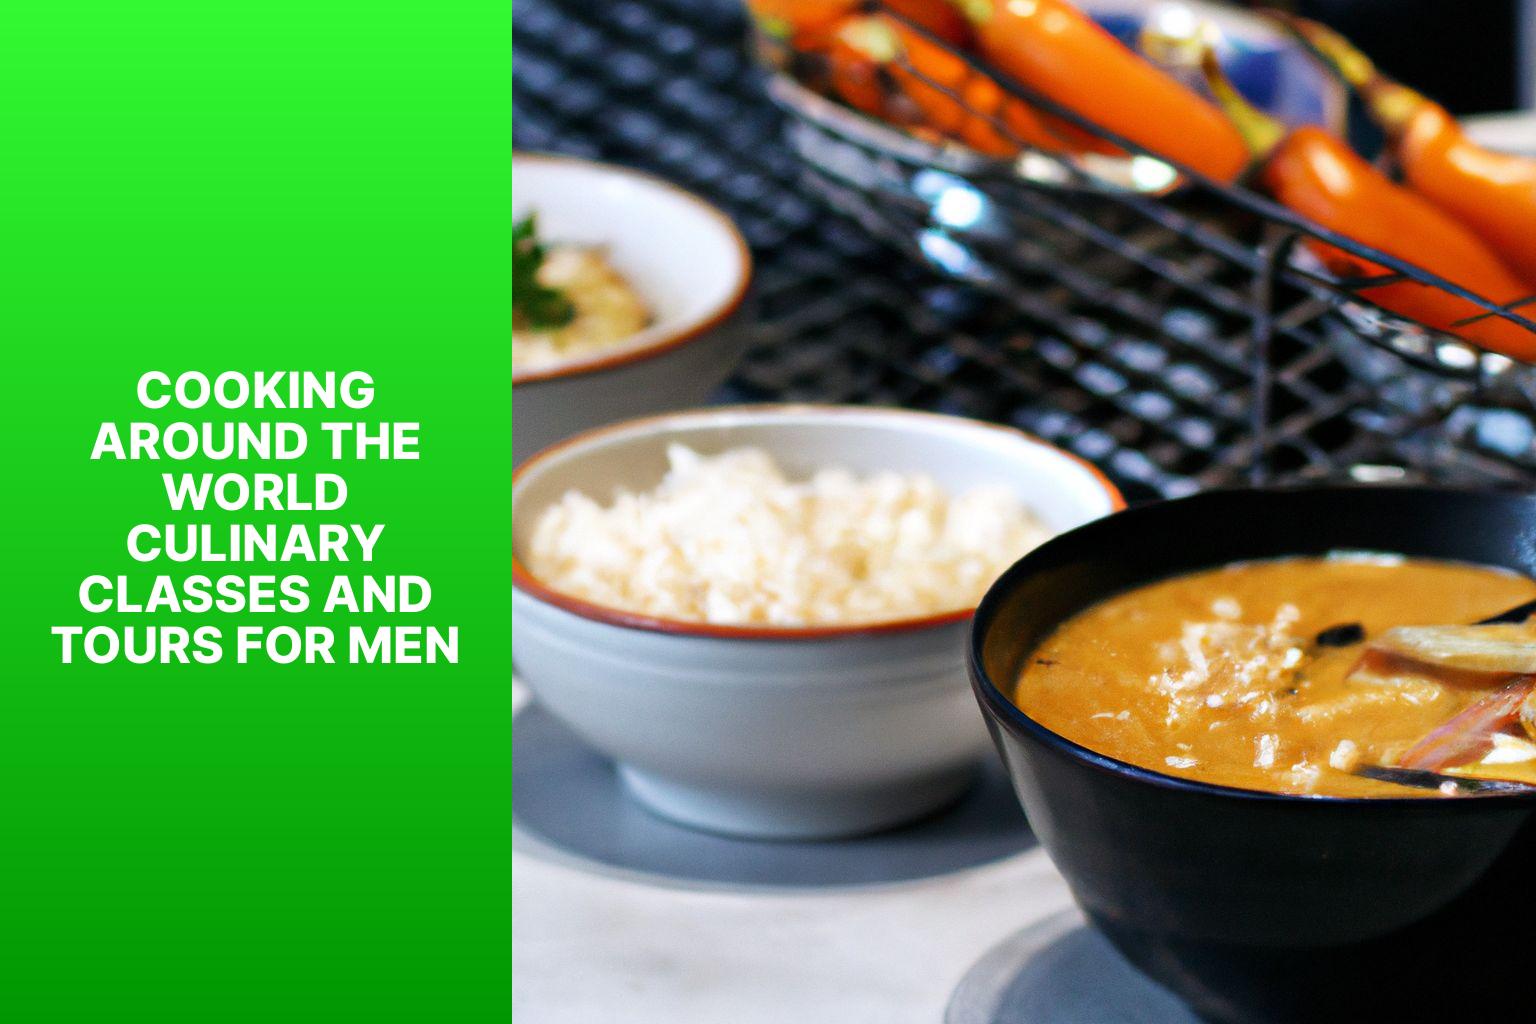 Cooking Around the World: Culinary Classes and Tours for Men